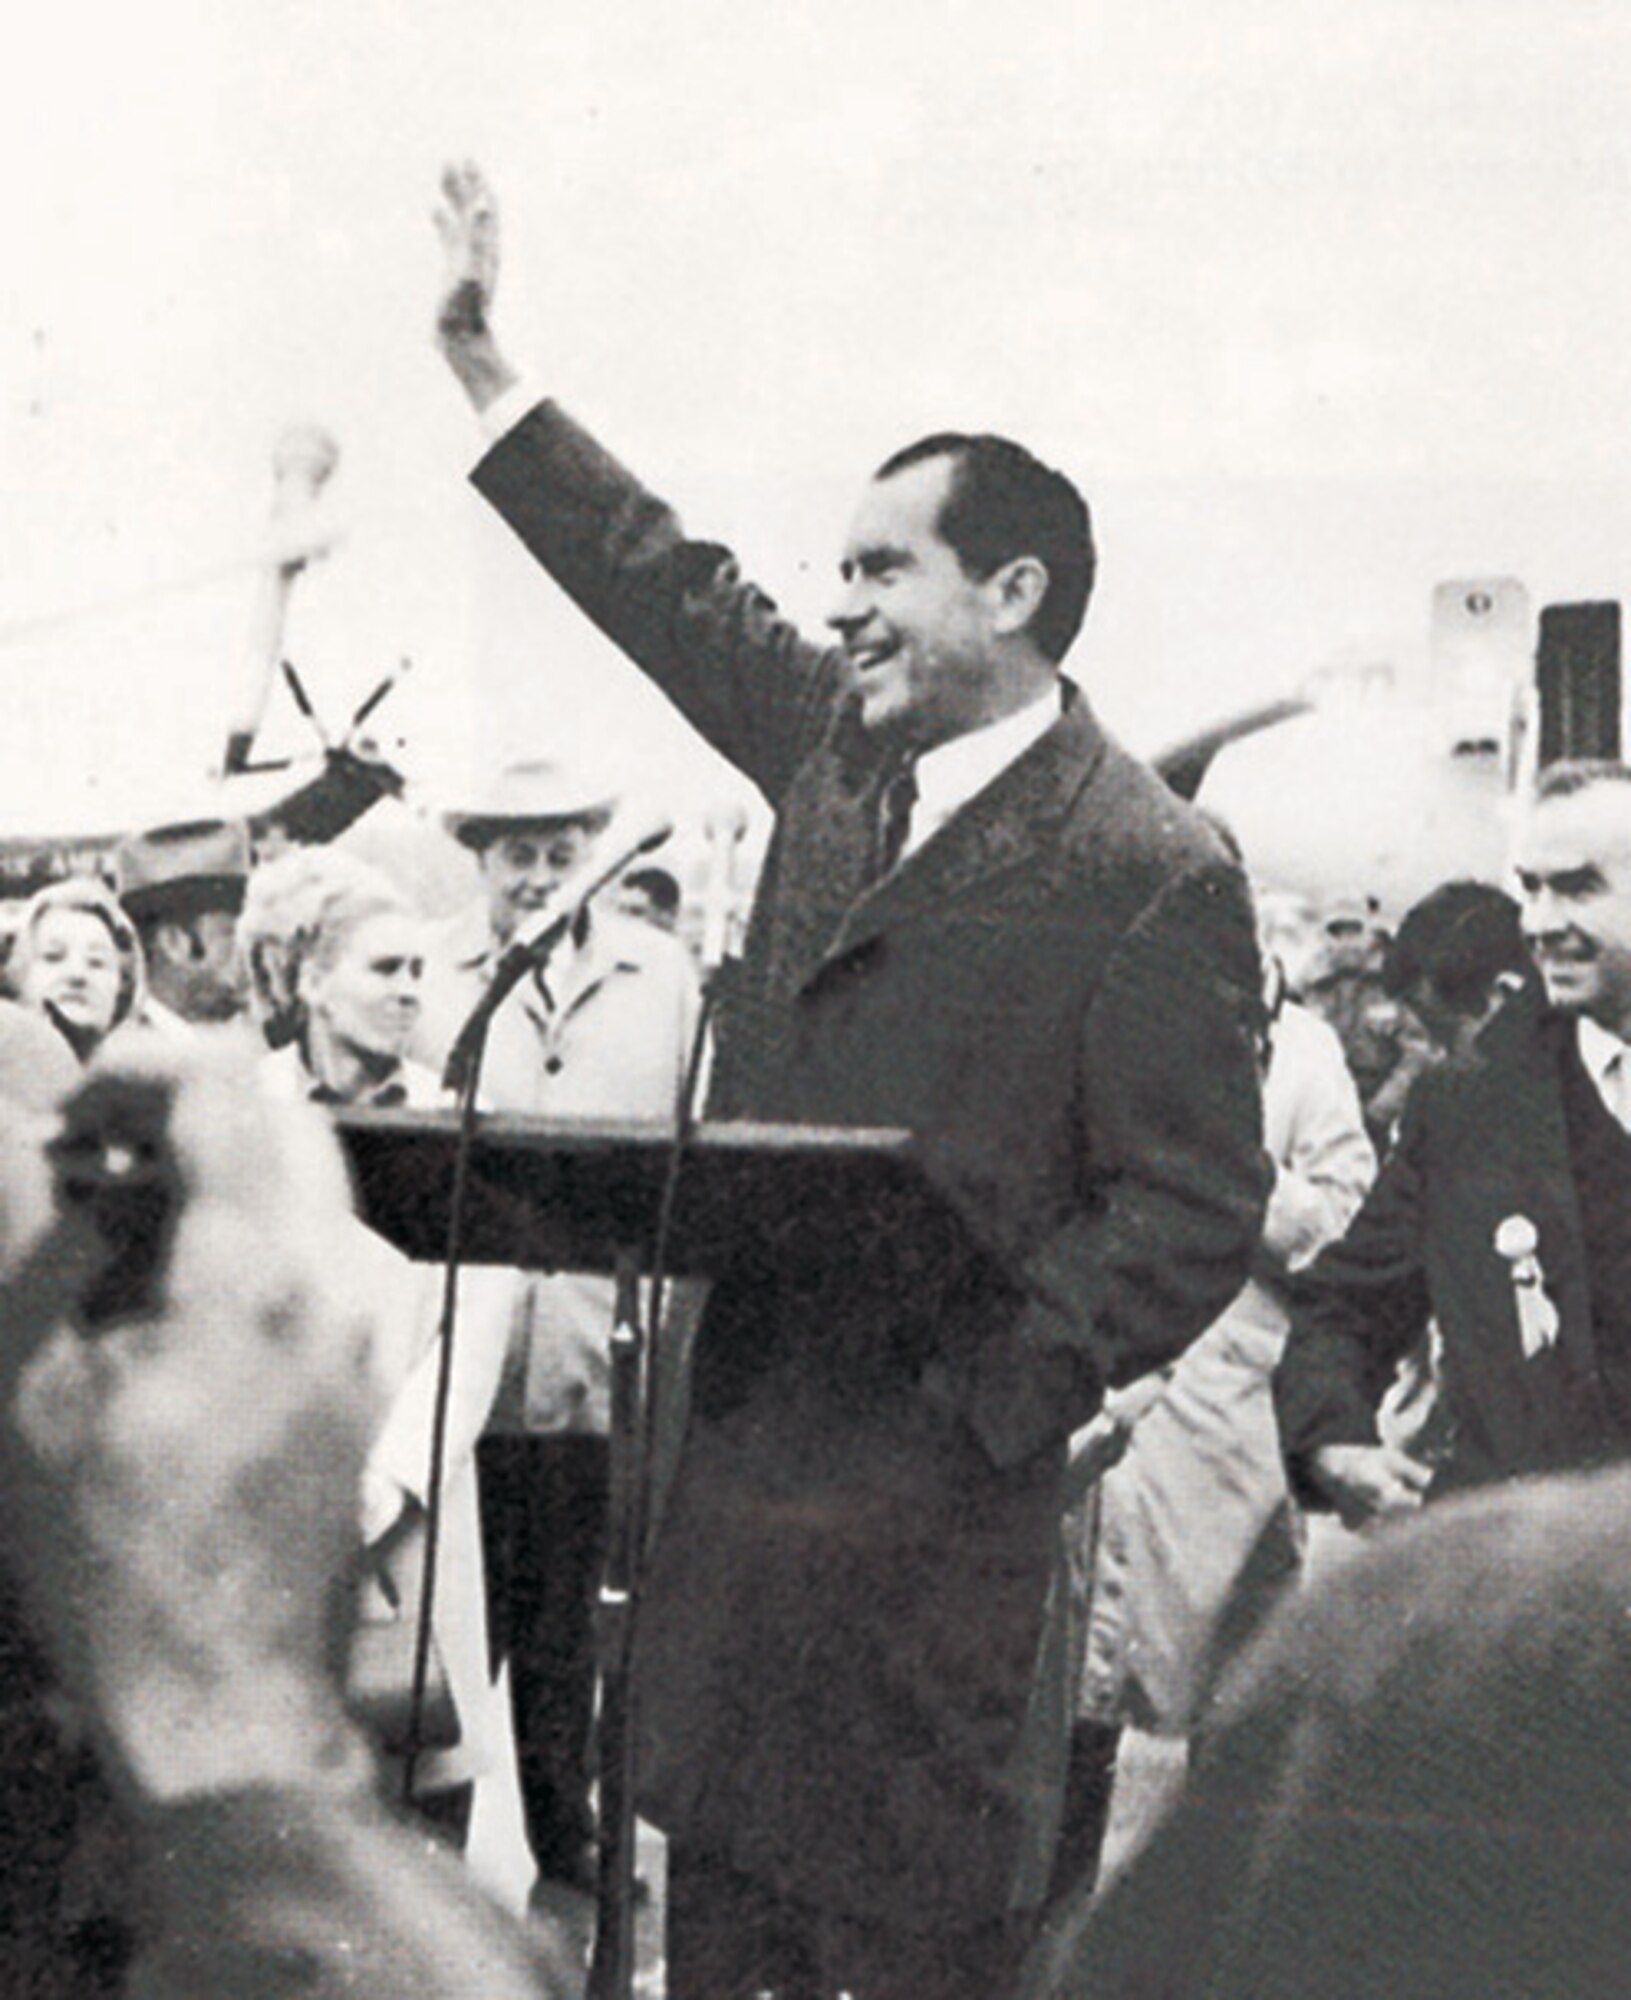 President Richard M. Nixon visits the 188th Tactical Reconnaissance Group (now the 188th Wing) at Ebbing Air National Guard Base, Fort Smith, Ark., Dec. 6, 1969. While at the 188th, the president is presented with a plaque by Col. Edward Schneider, 188th TRG commander. The plaque reads, “It was our pleasure to host your visit to Fort Smith, Ark.” (188th Public Affairs courtesy photo)